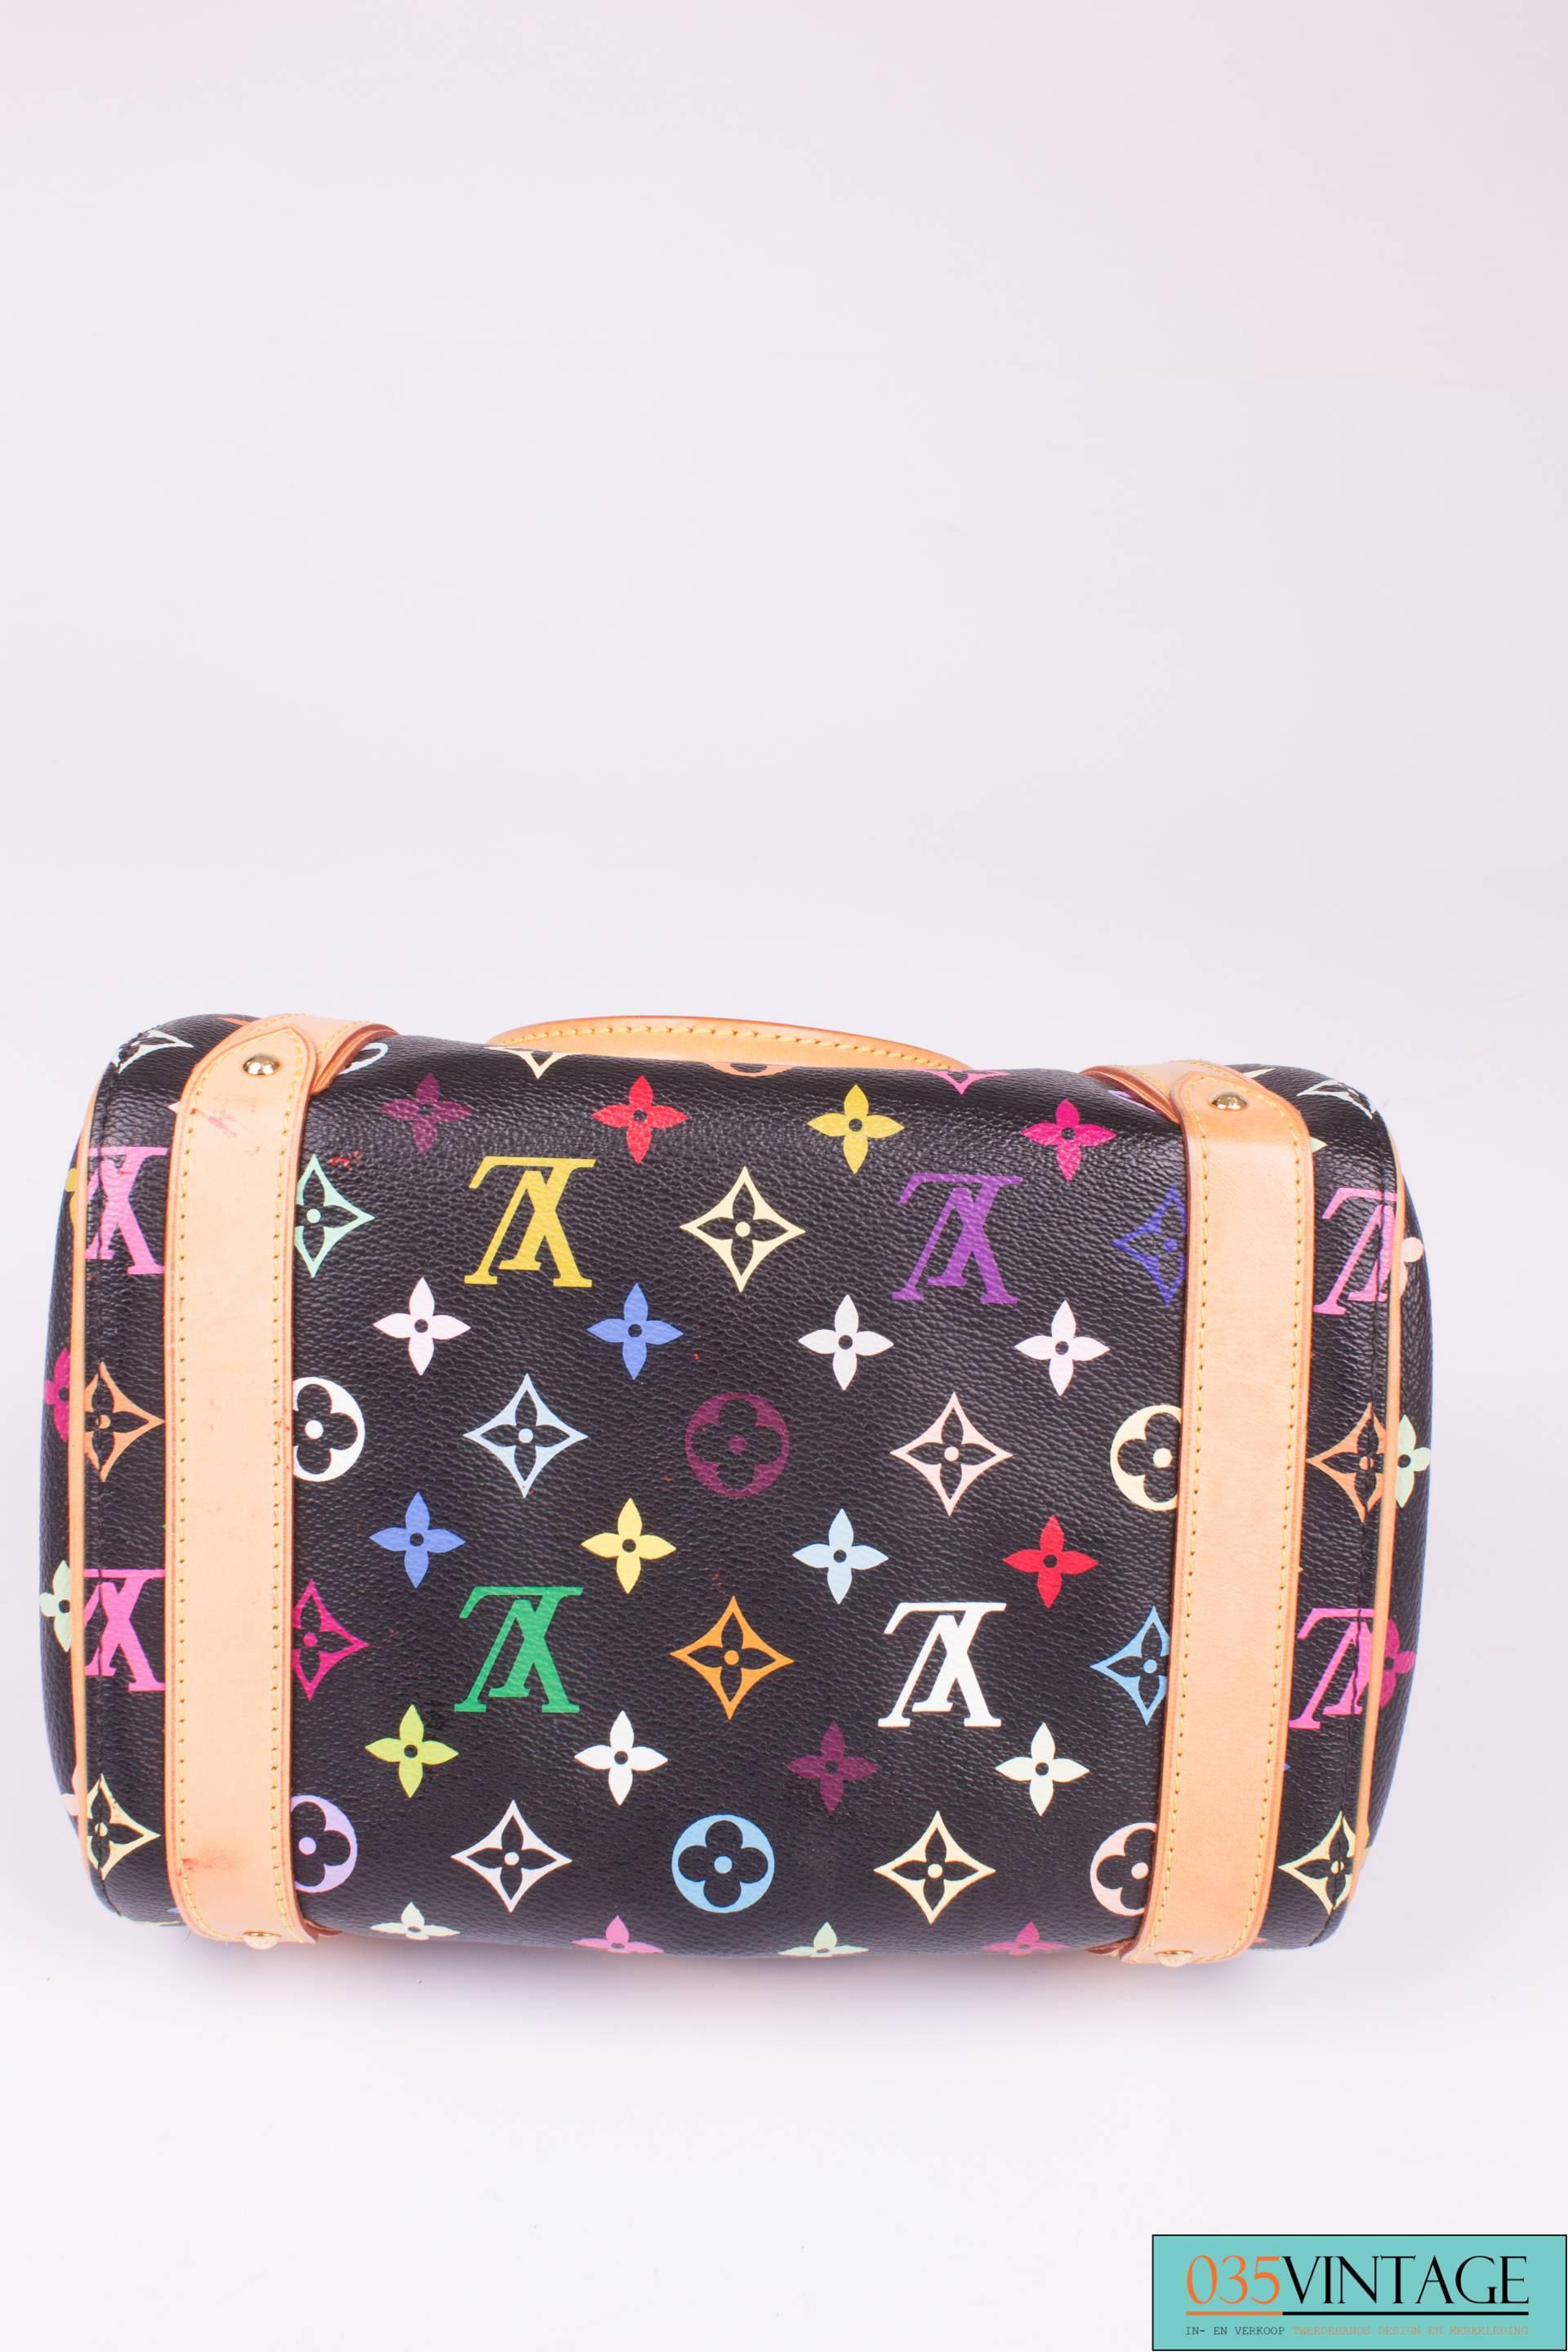 This bag is adorable and playful; it is the Louis Vuitton Monogram Multicolor Priscilla Bag, this time in black.

Uniquely shaped, this style is based on the bowling bag with a little flap pocket on the front. The black canvas is covered with